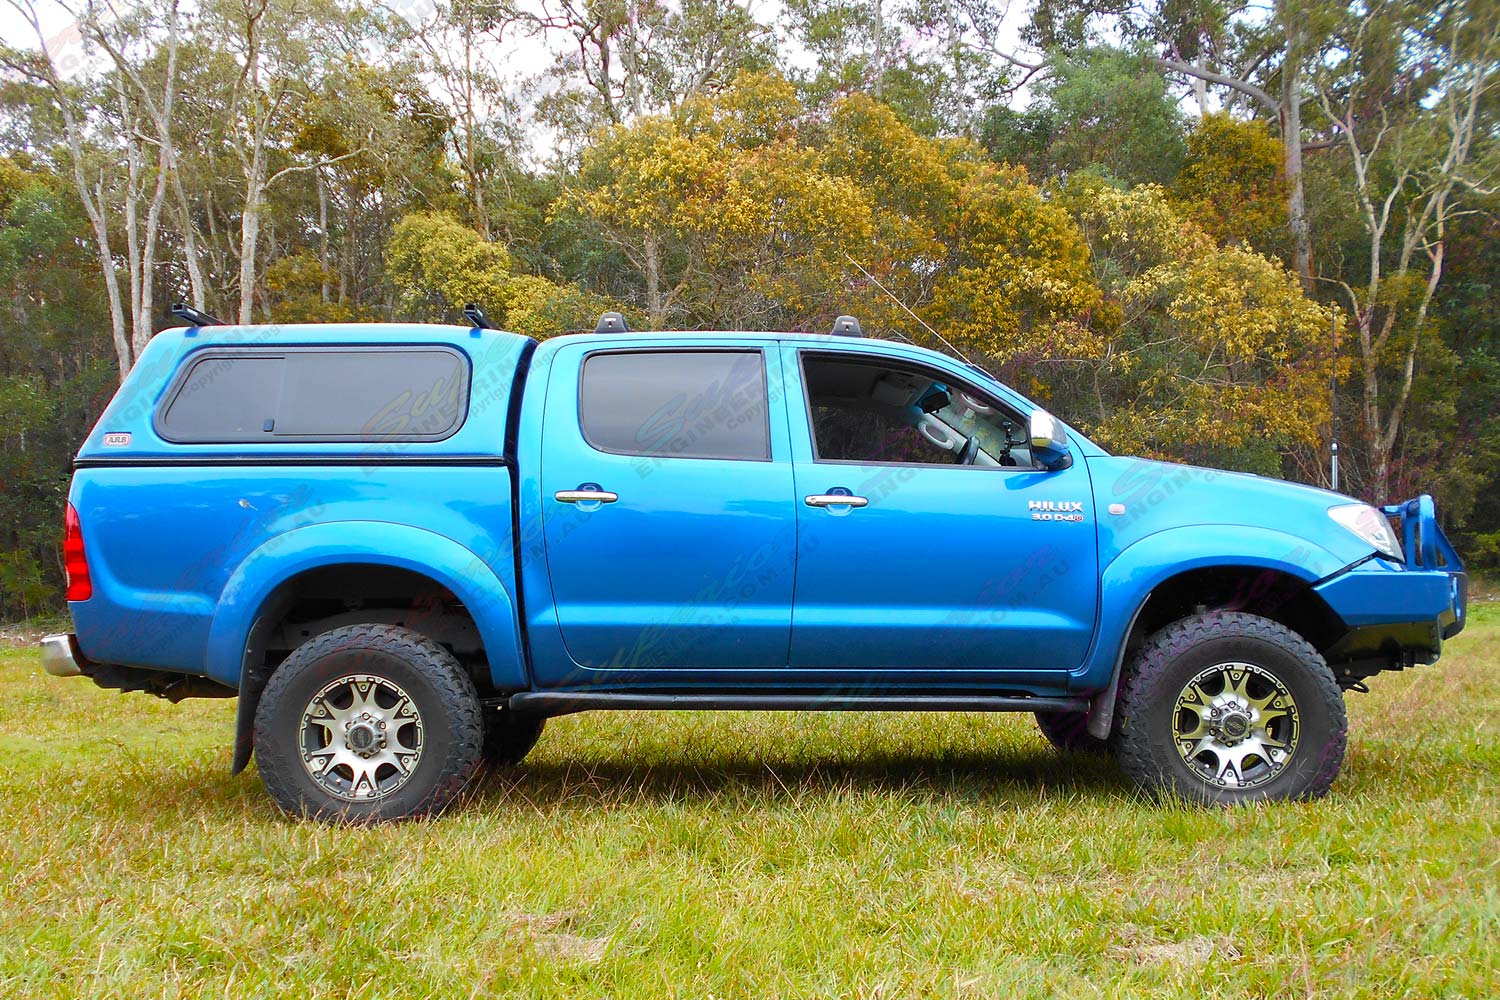 Right side view of a blue dual cab Toyota Hilux (Vigo) fitted with a top of the range 3 inch Bilstein lift kit